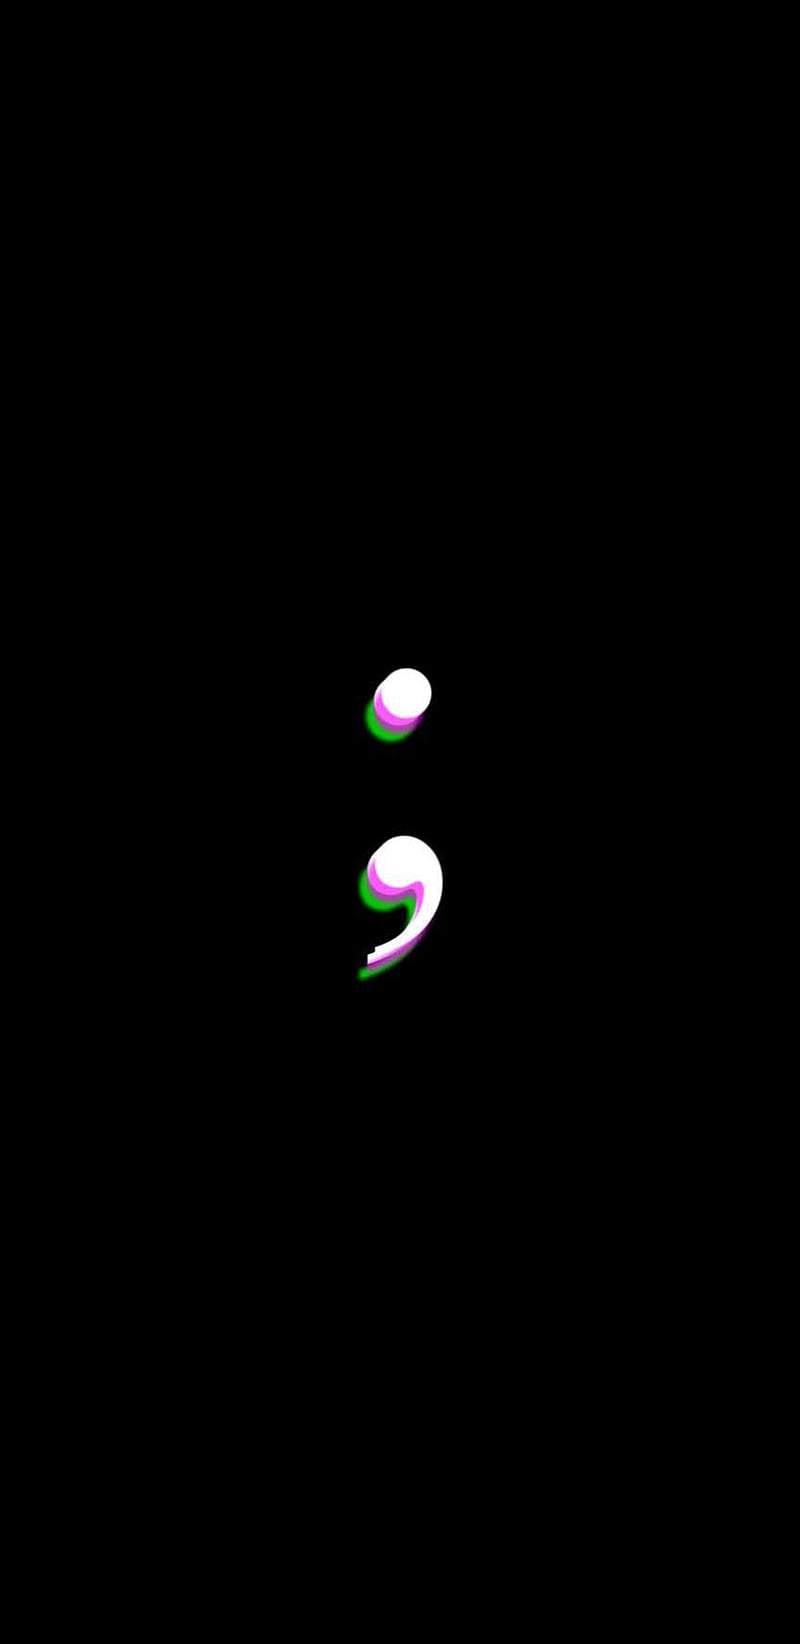 Semicolon Images  Free Photos PNG Stickers Wallpapers  Backgrounds   rawpixel